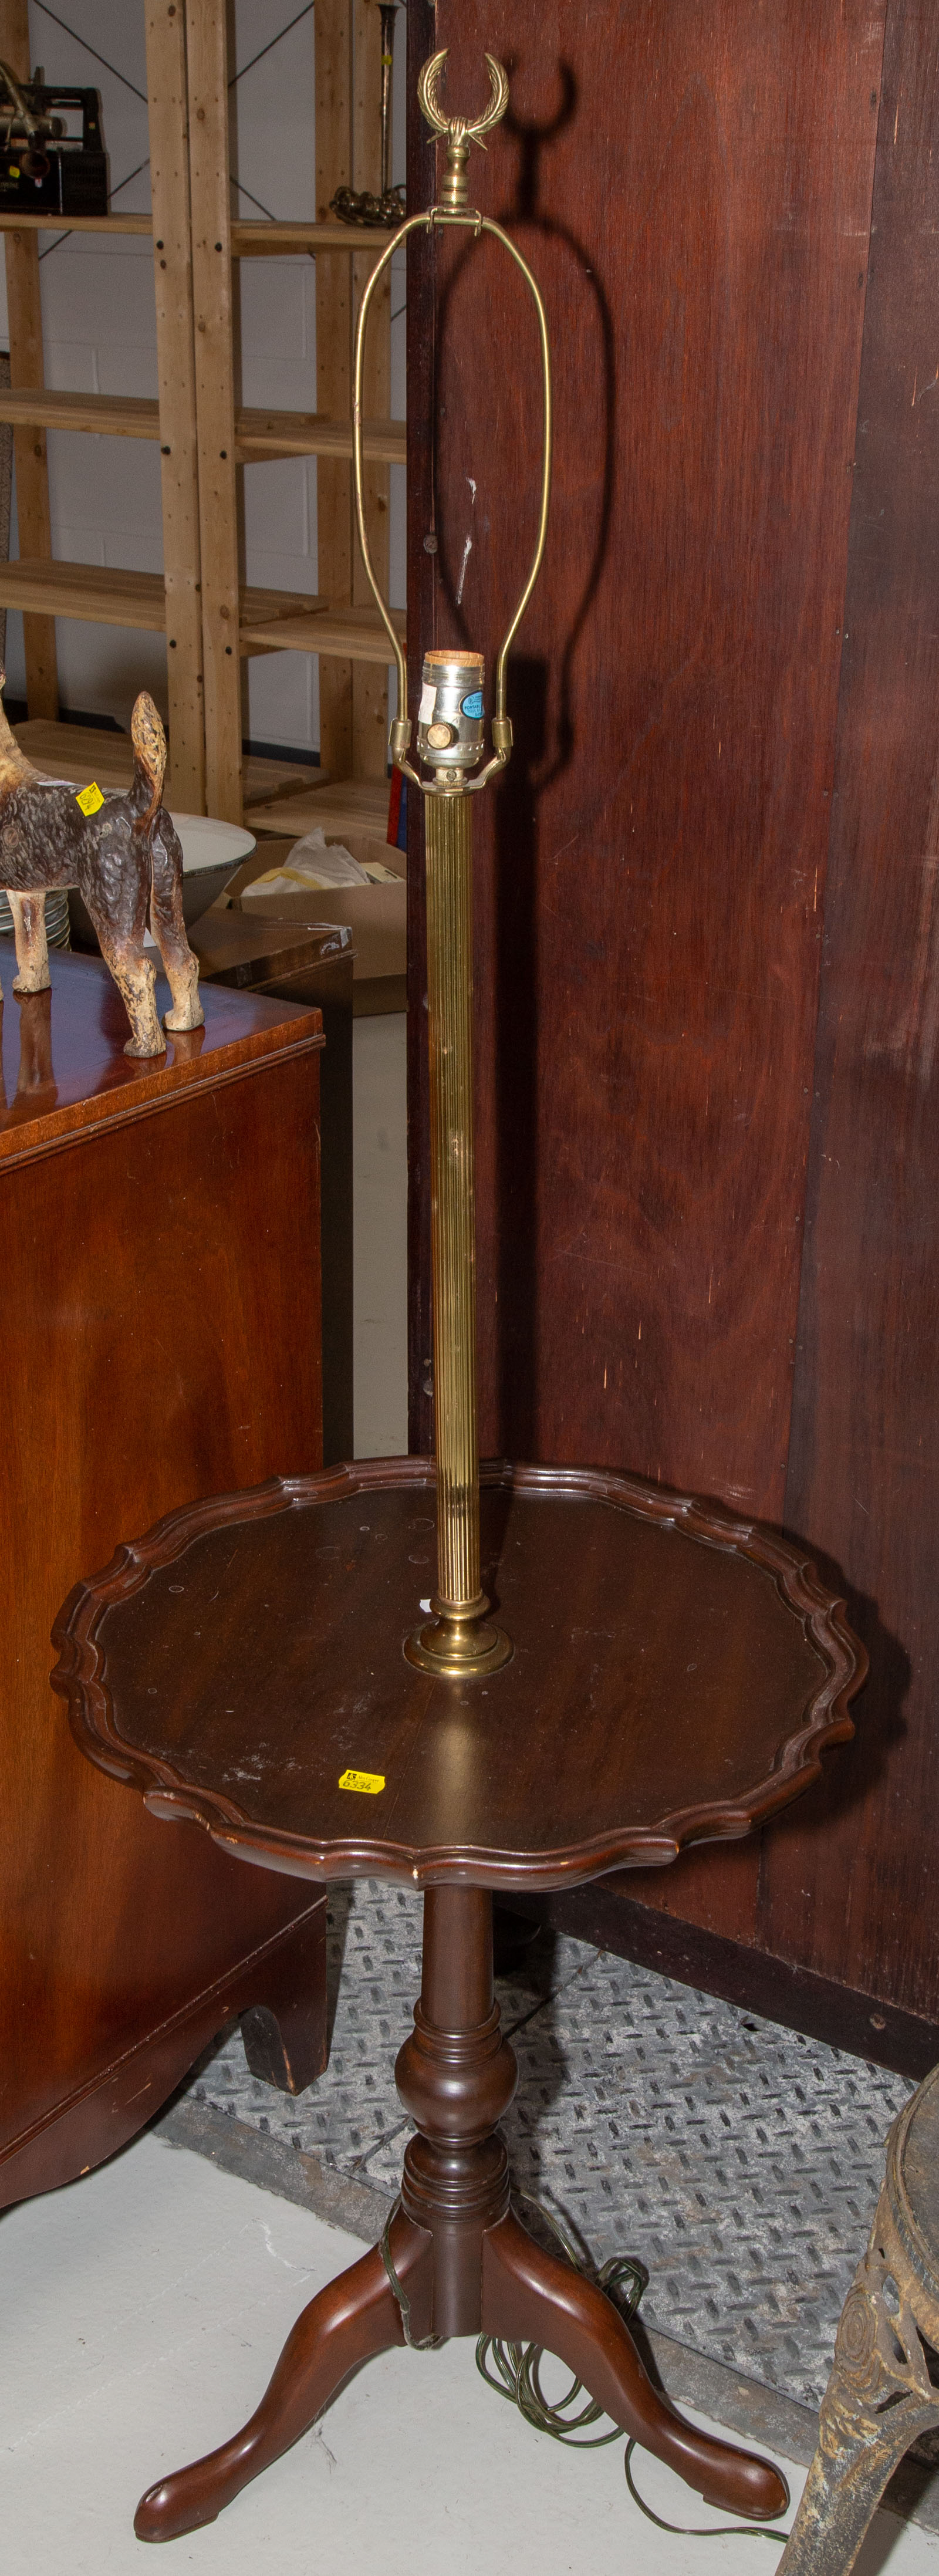 QUEEN ANNE STYLE FLOOR LAMP TABLE 310593